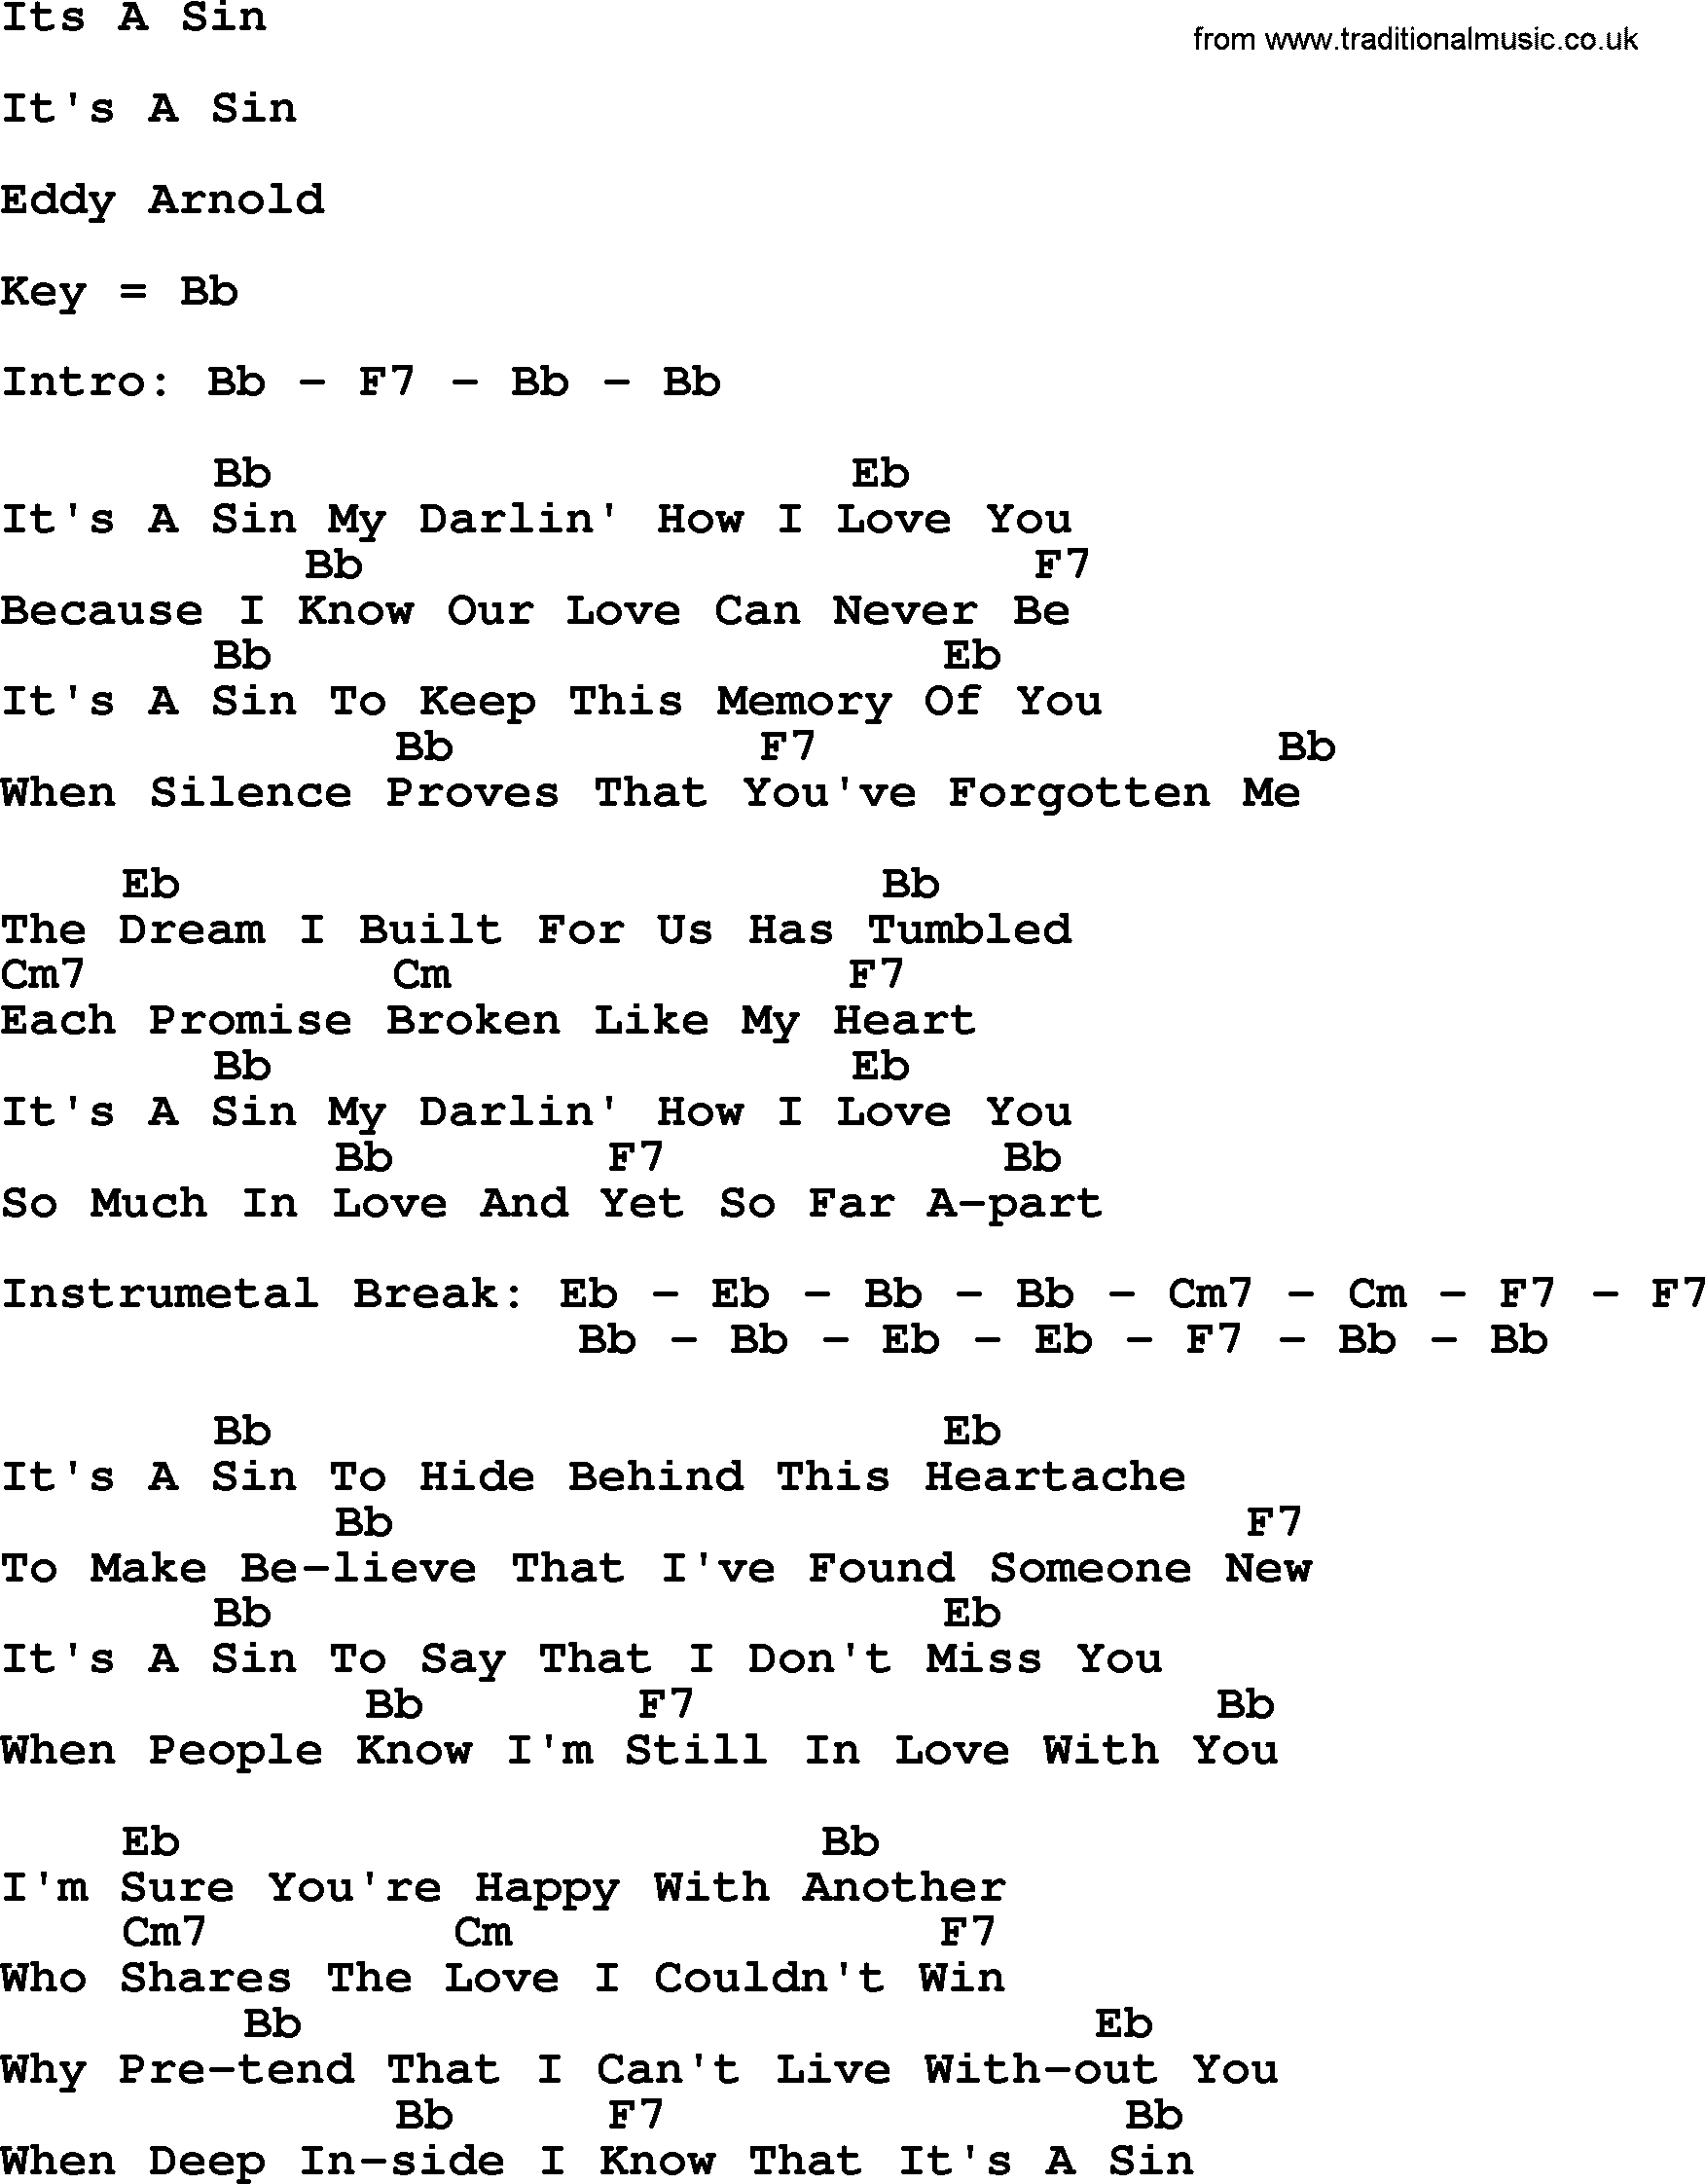 Bluegrass song: Its A Sin, lyrics and chords